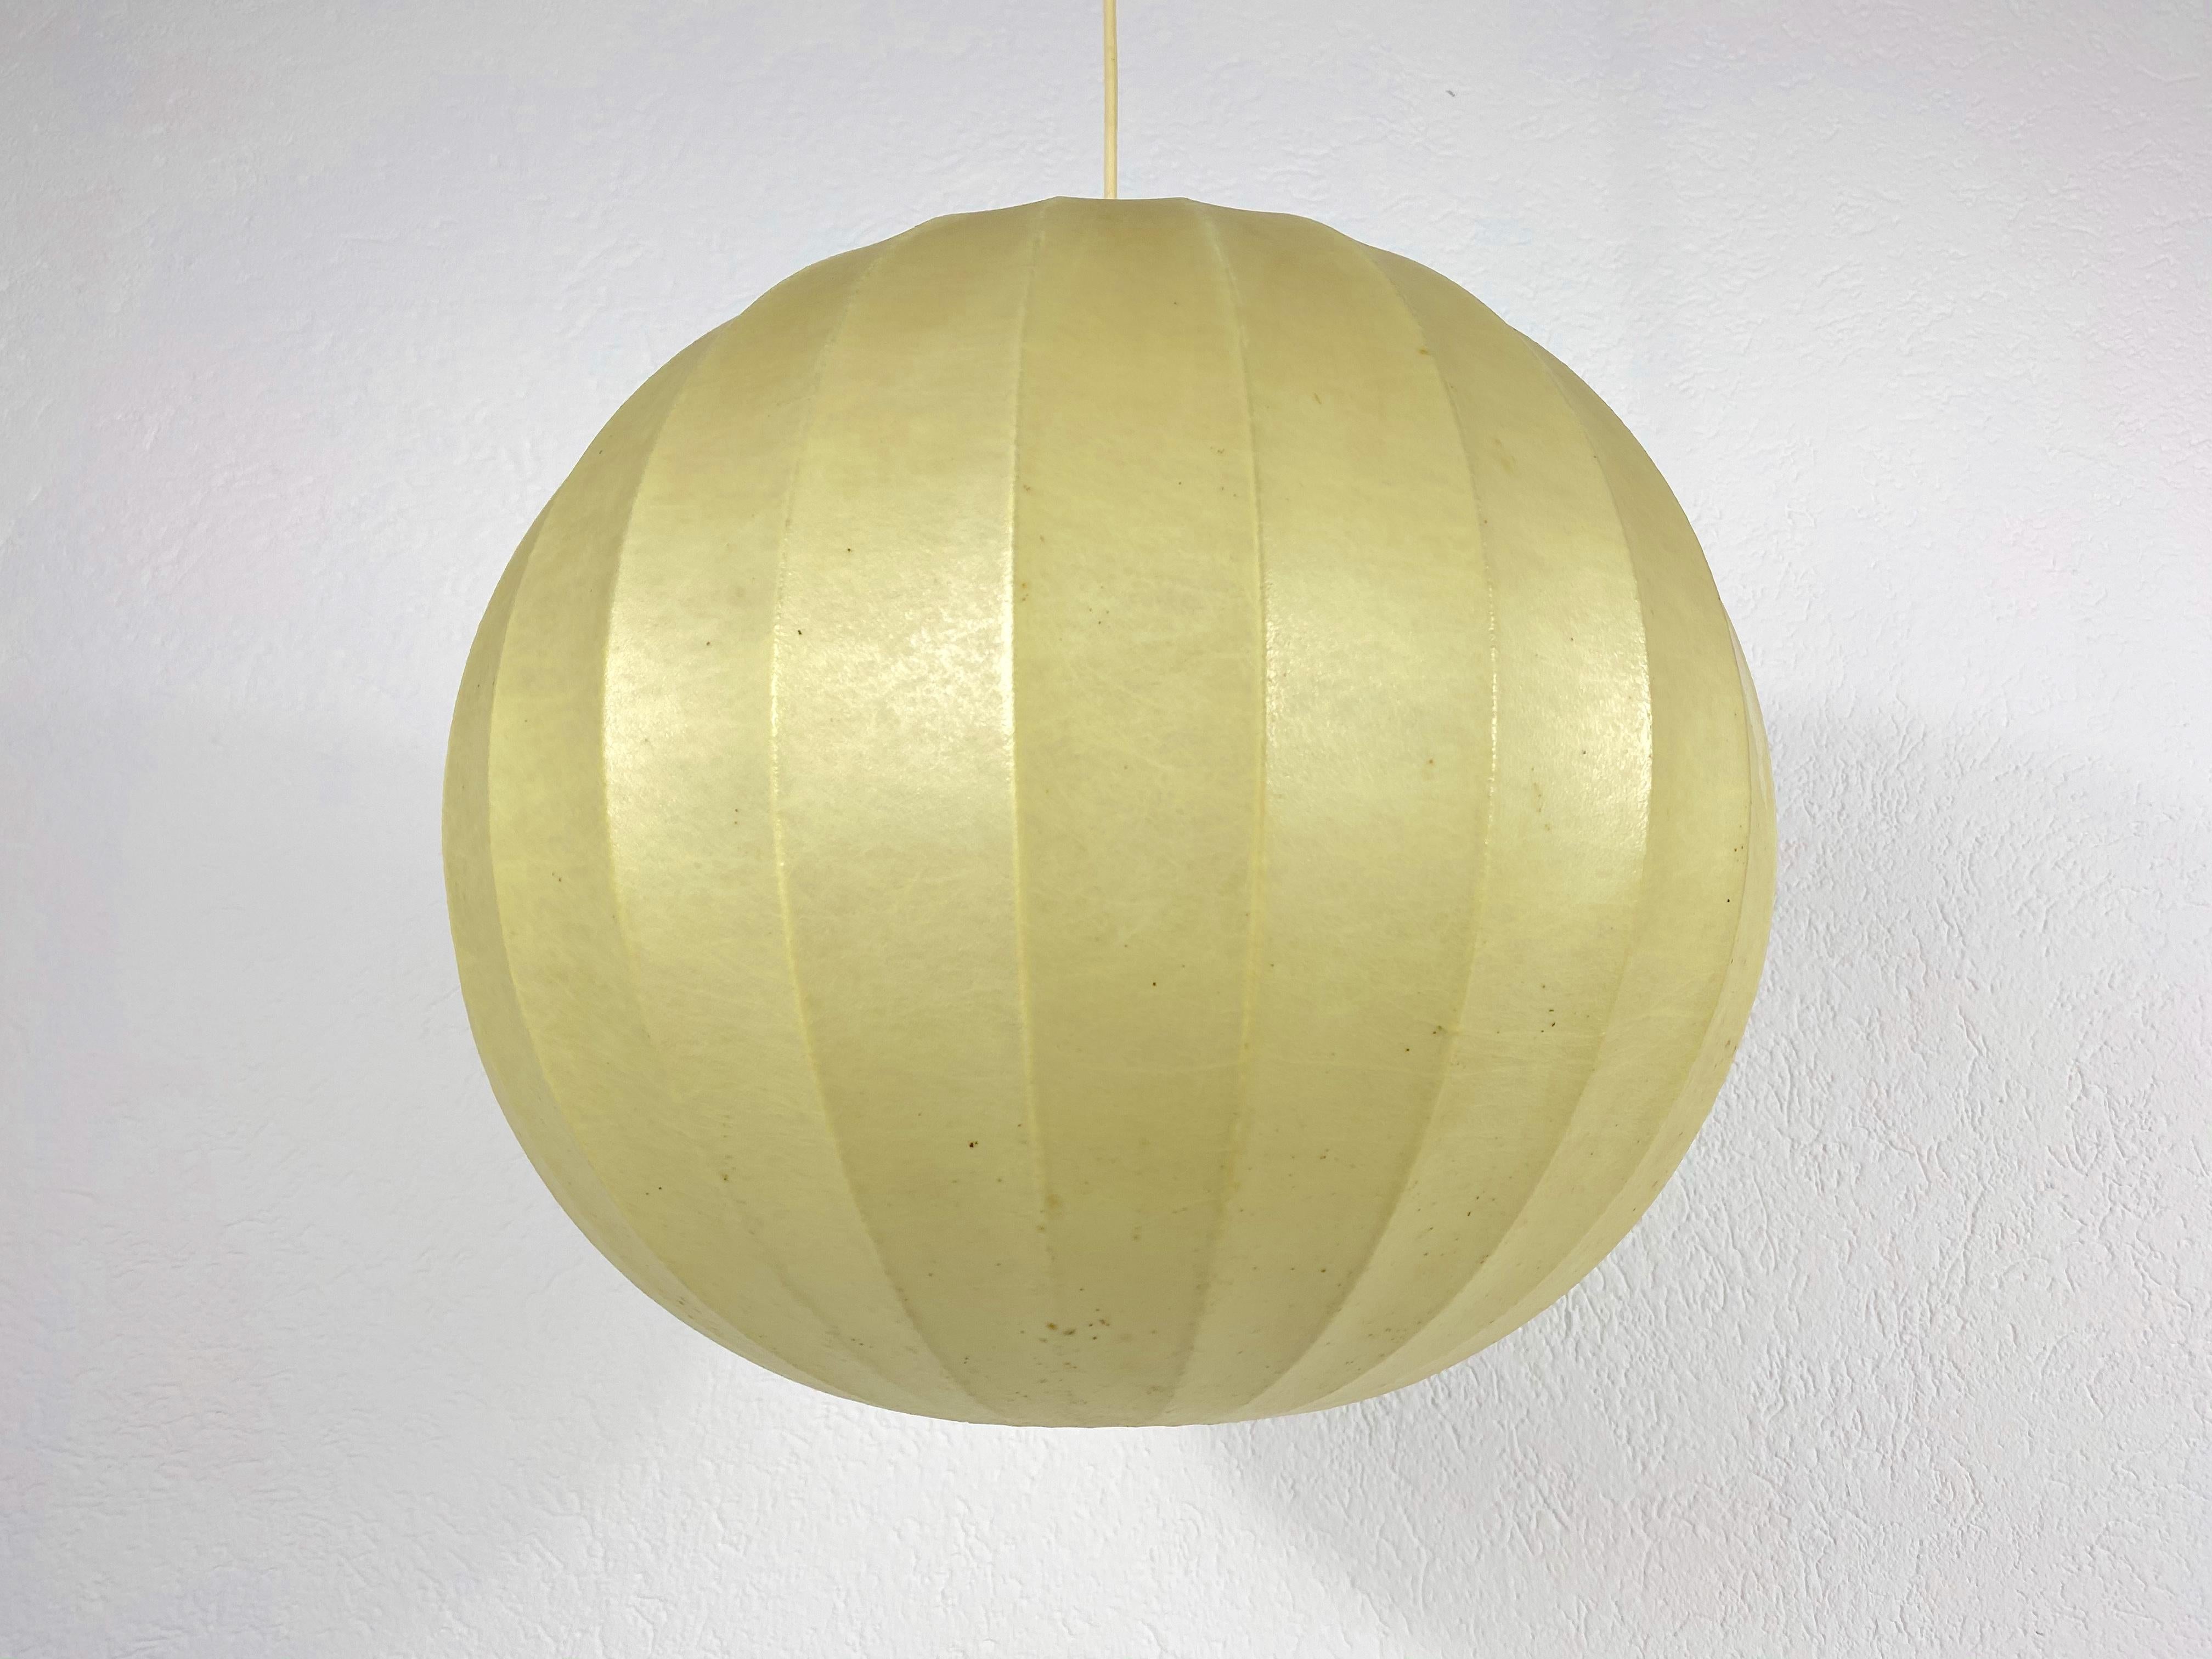 A cocoon hanging lamp made in Italy in the 1960s. It has a beautiful round design, which is similar to the lamps made by Castiglioni. 

Measures: Max height 90 cm

Height of shade 40 cm

Diameter 42 cm


The light requires one E27 light